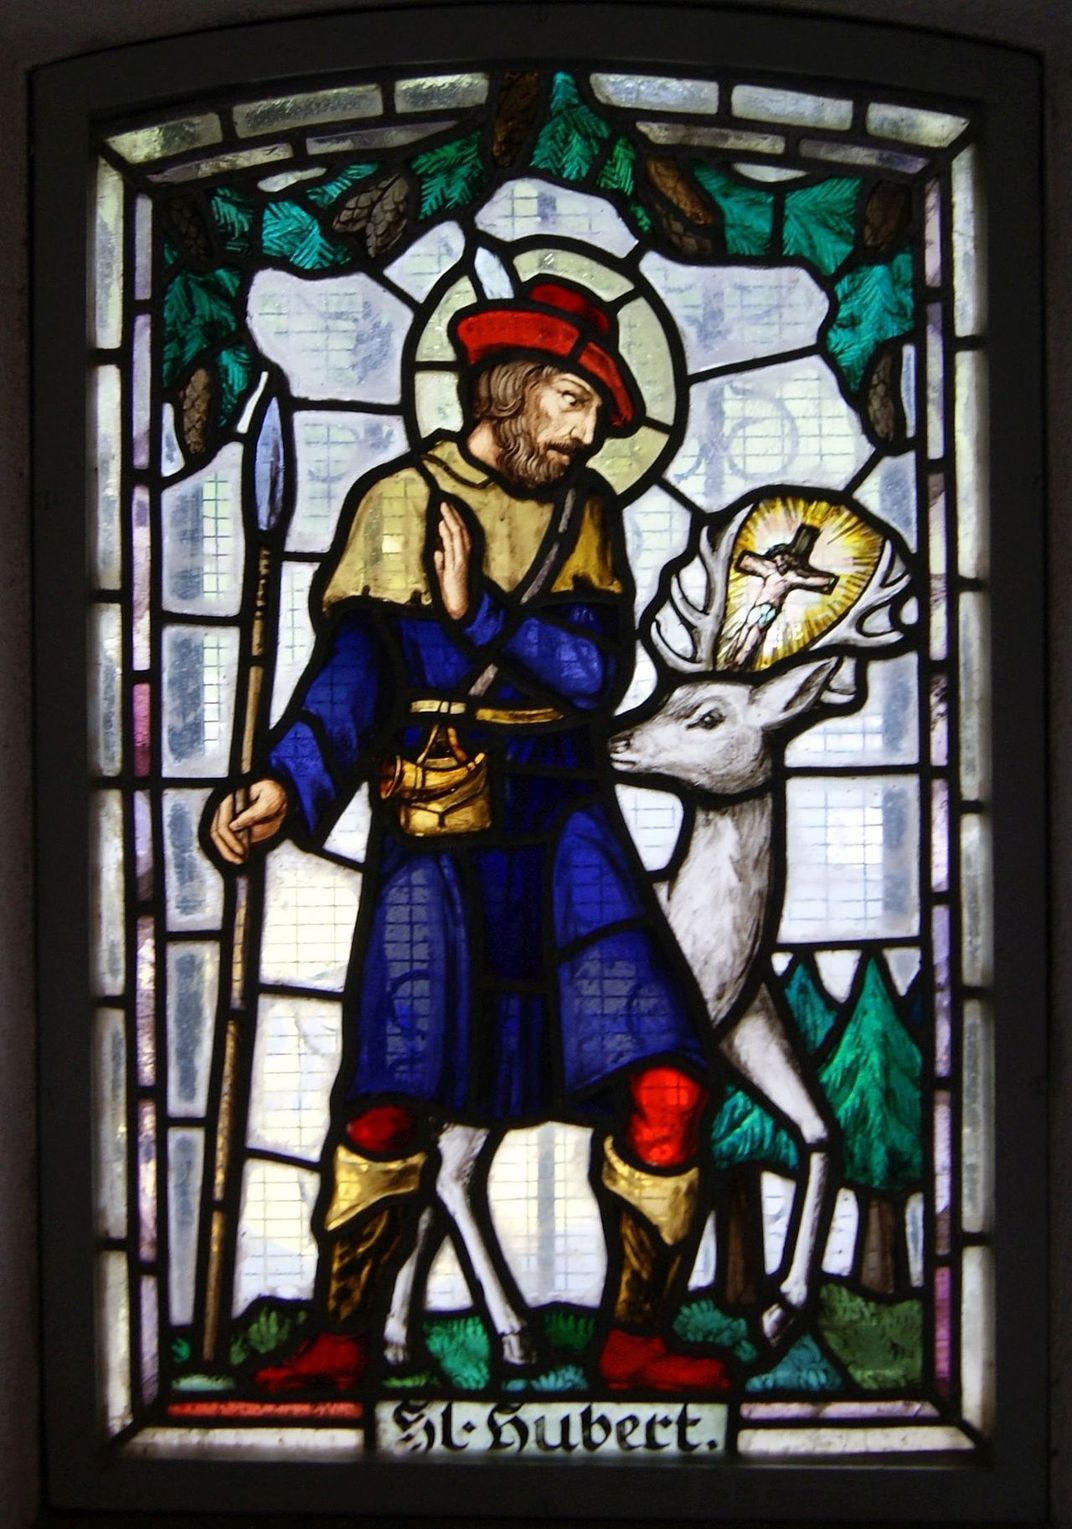 A stained-glass portrait of Saint Hubert, whose relics were believed to cure rabies